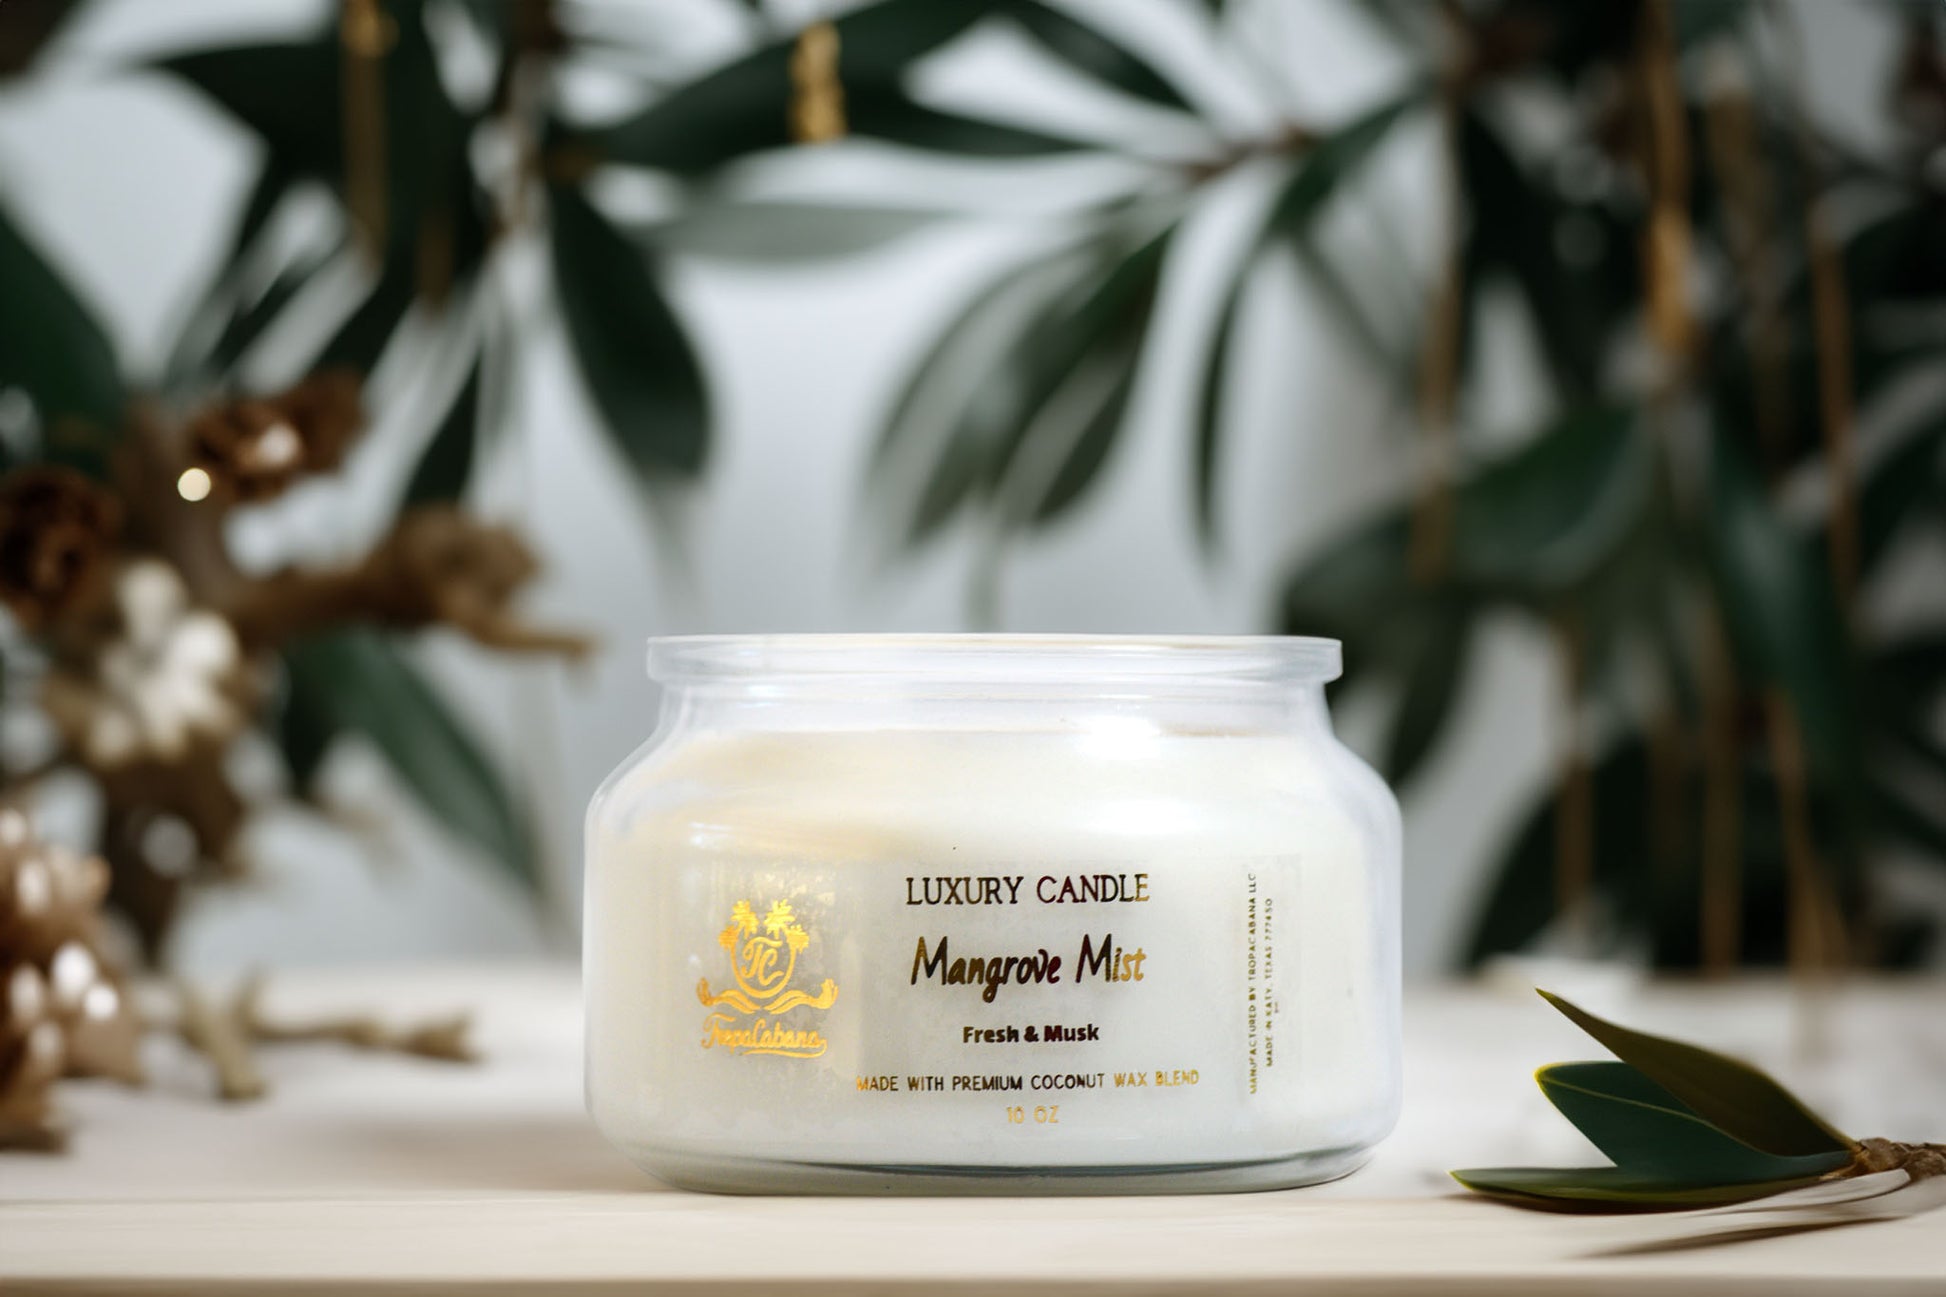 TropaCabana, 10 oz Mangrove Mist Candle, Luxury Candle, Coconut Wax Candle, Vegan Candle, Fragrance fresh and musky, Candles for Men, Gifts for Him.